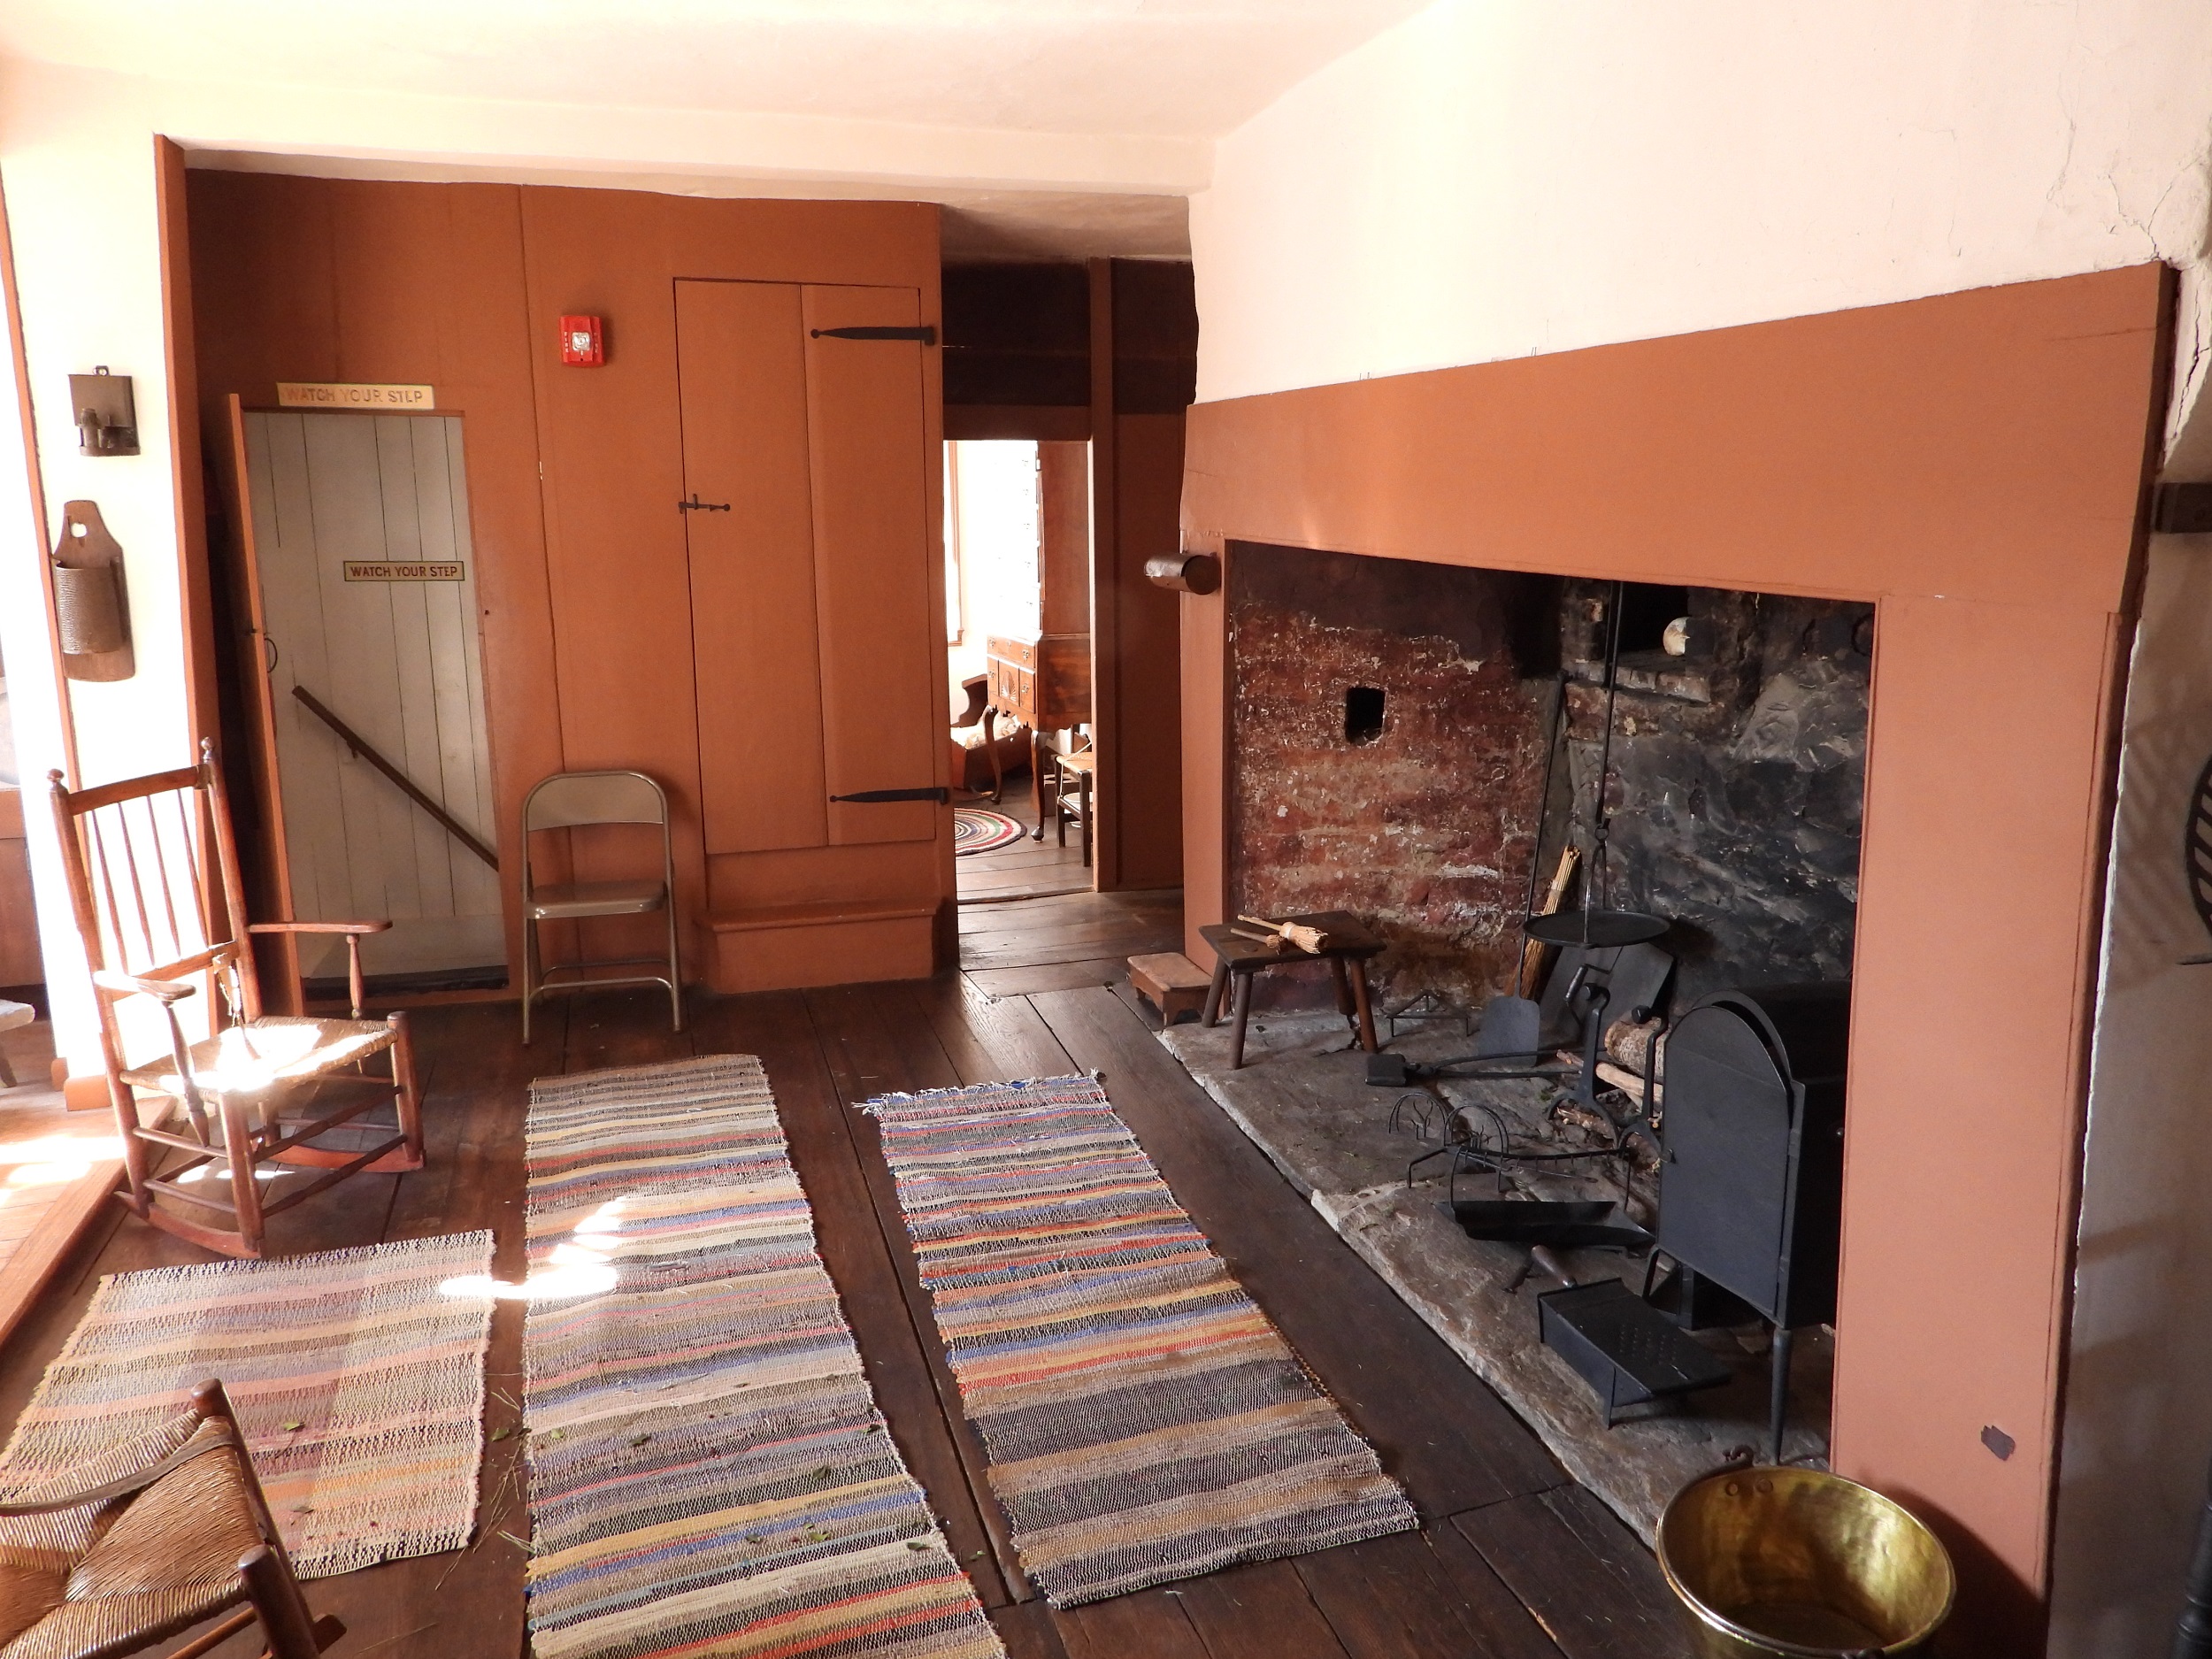 Photograph of a replica colonial American first-floor kitchen, with a wide fireplace with two rocking chairs and three woven rugs in front of it